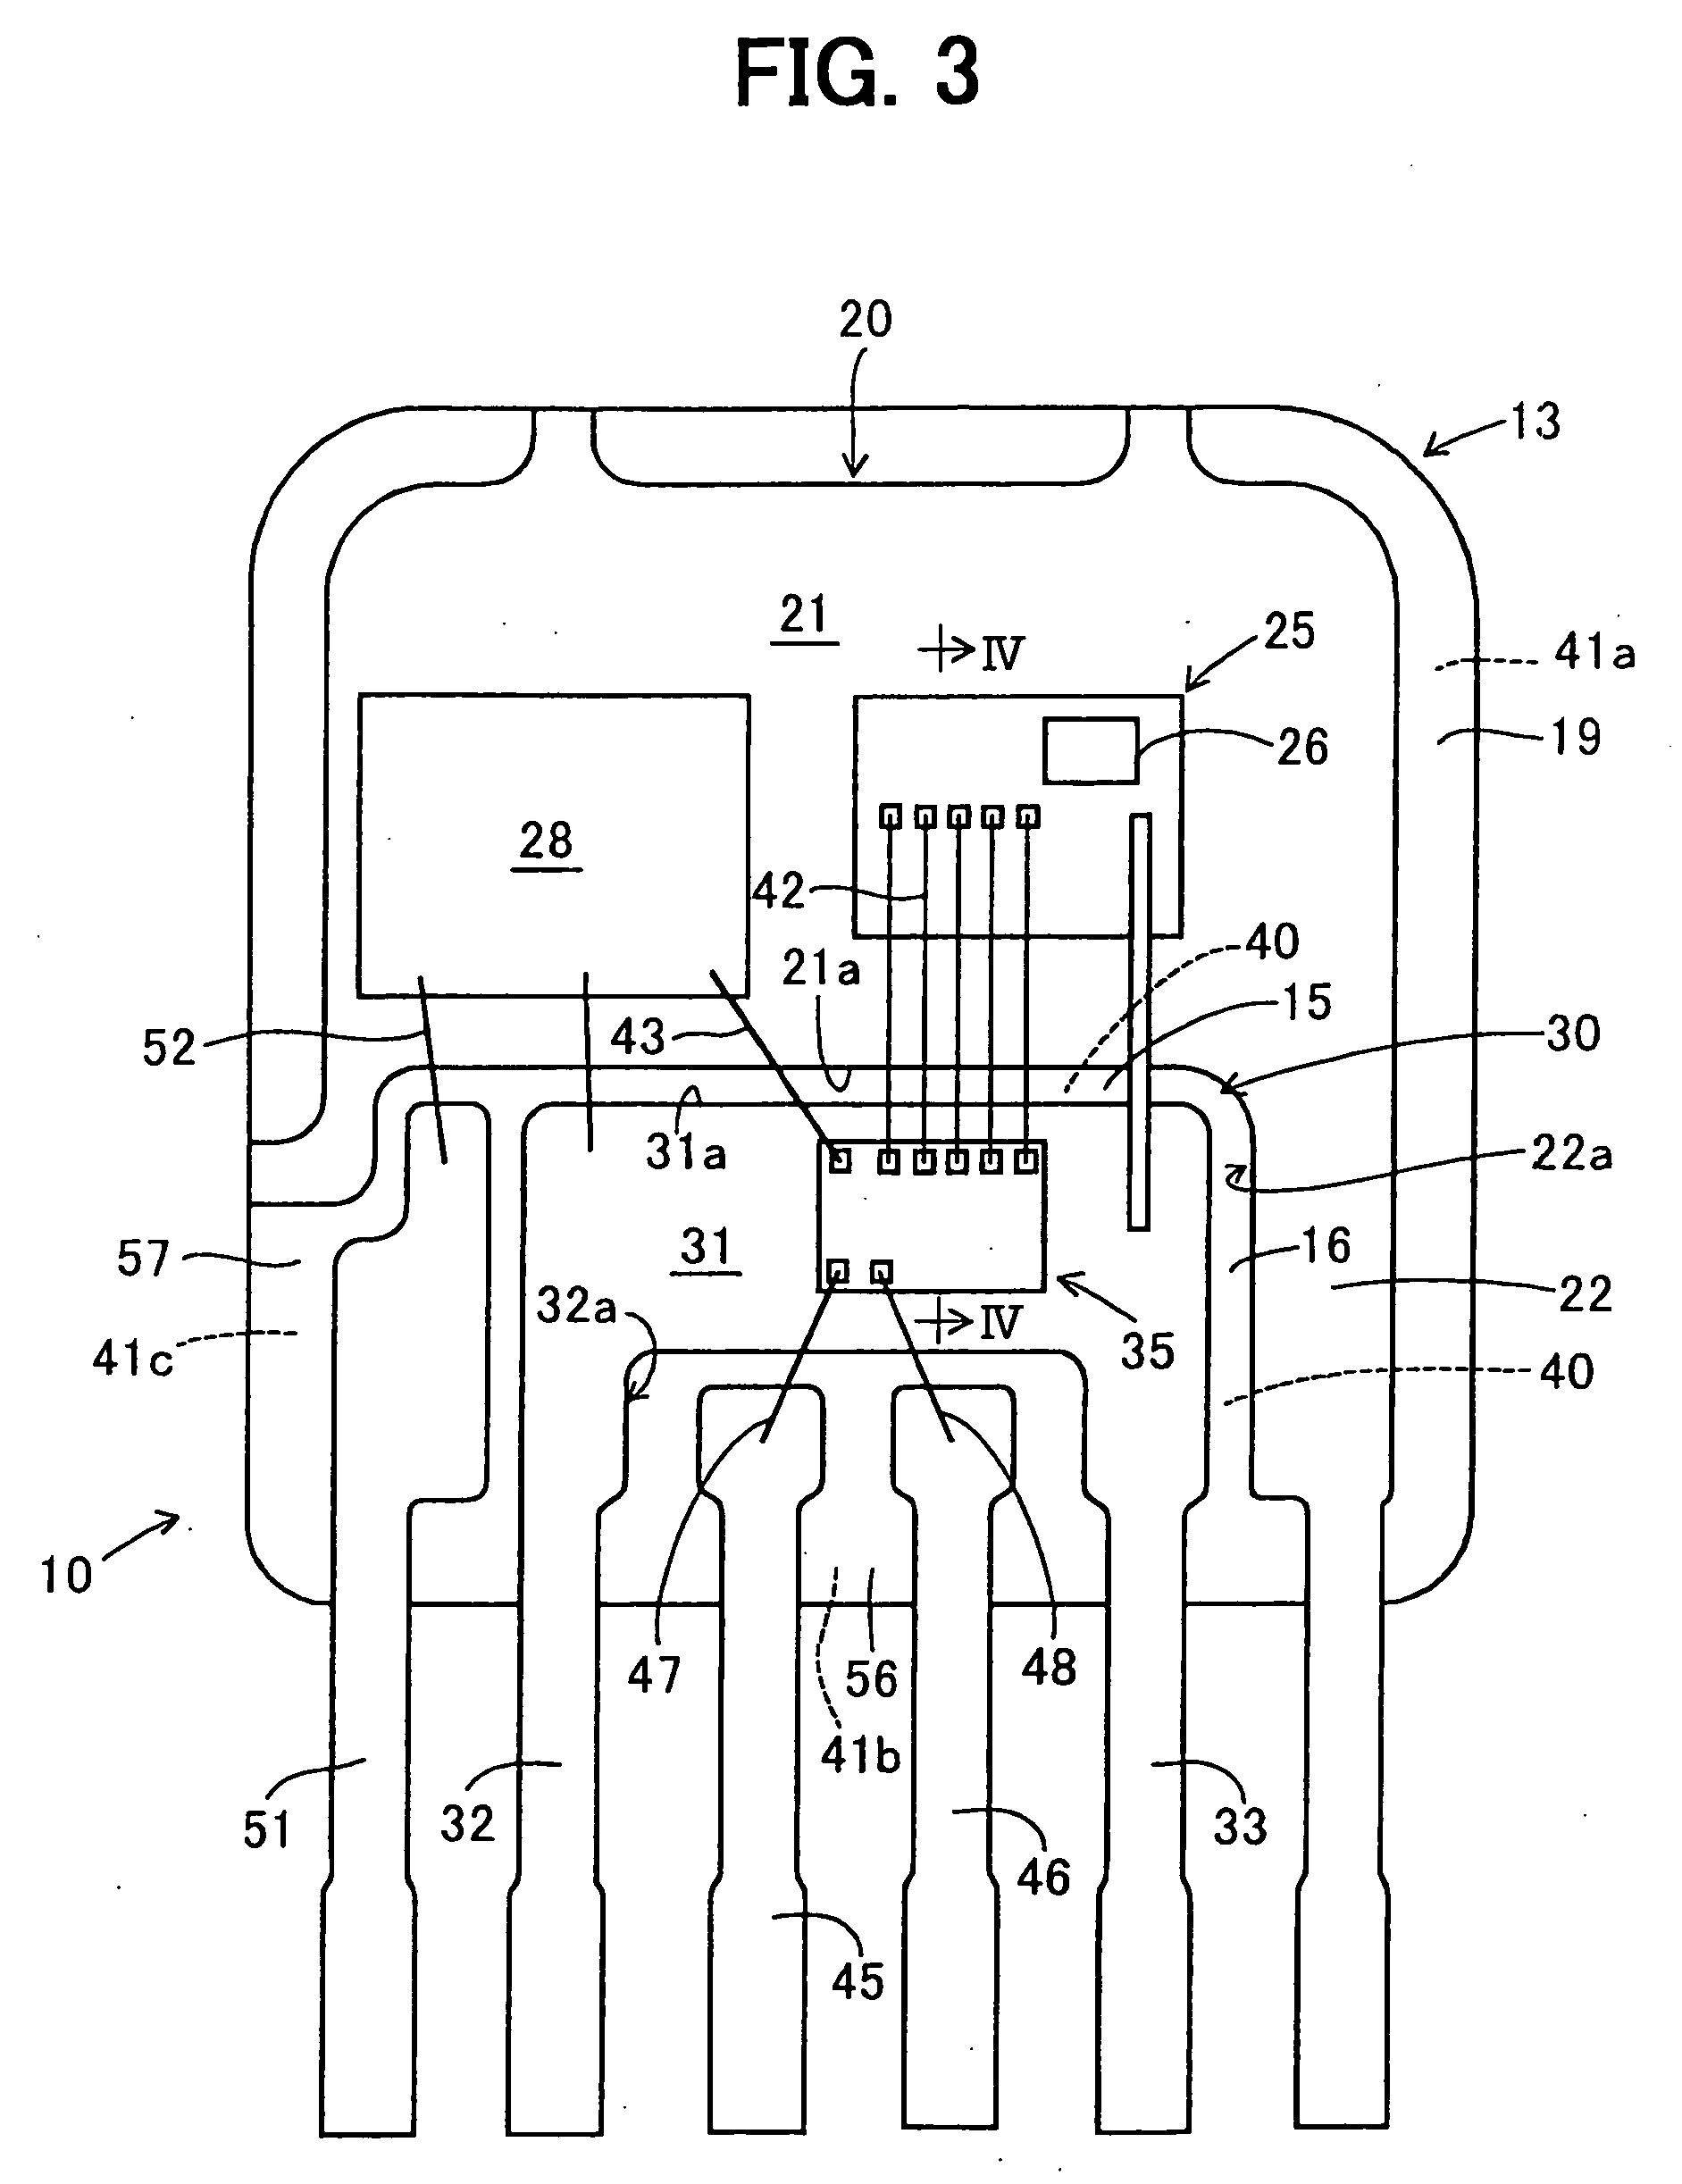 Semiconductor equipment having multiple semiconductor devices and multiple lead frames